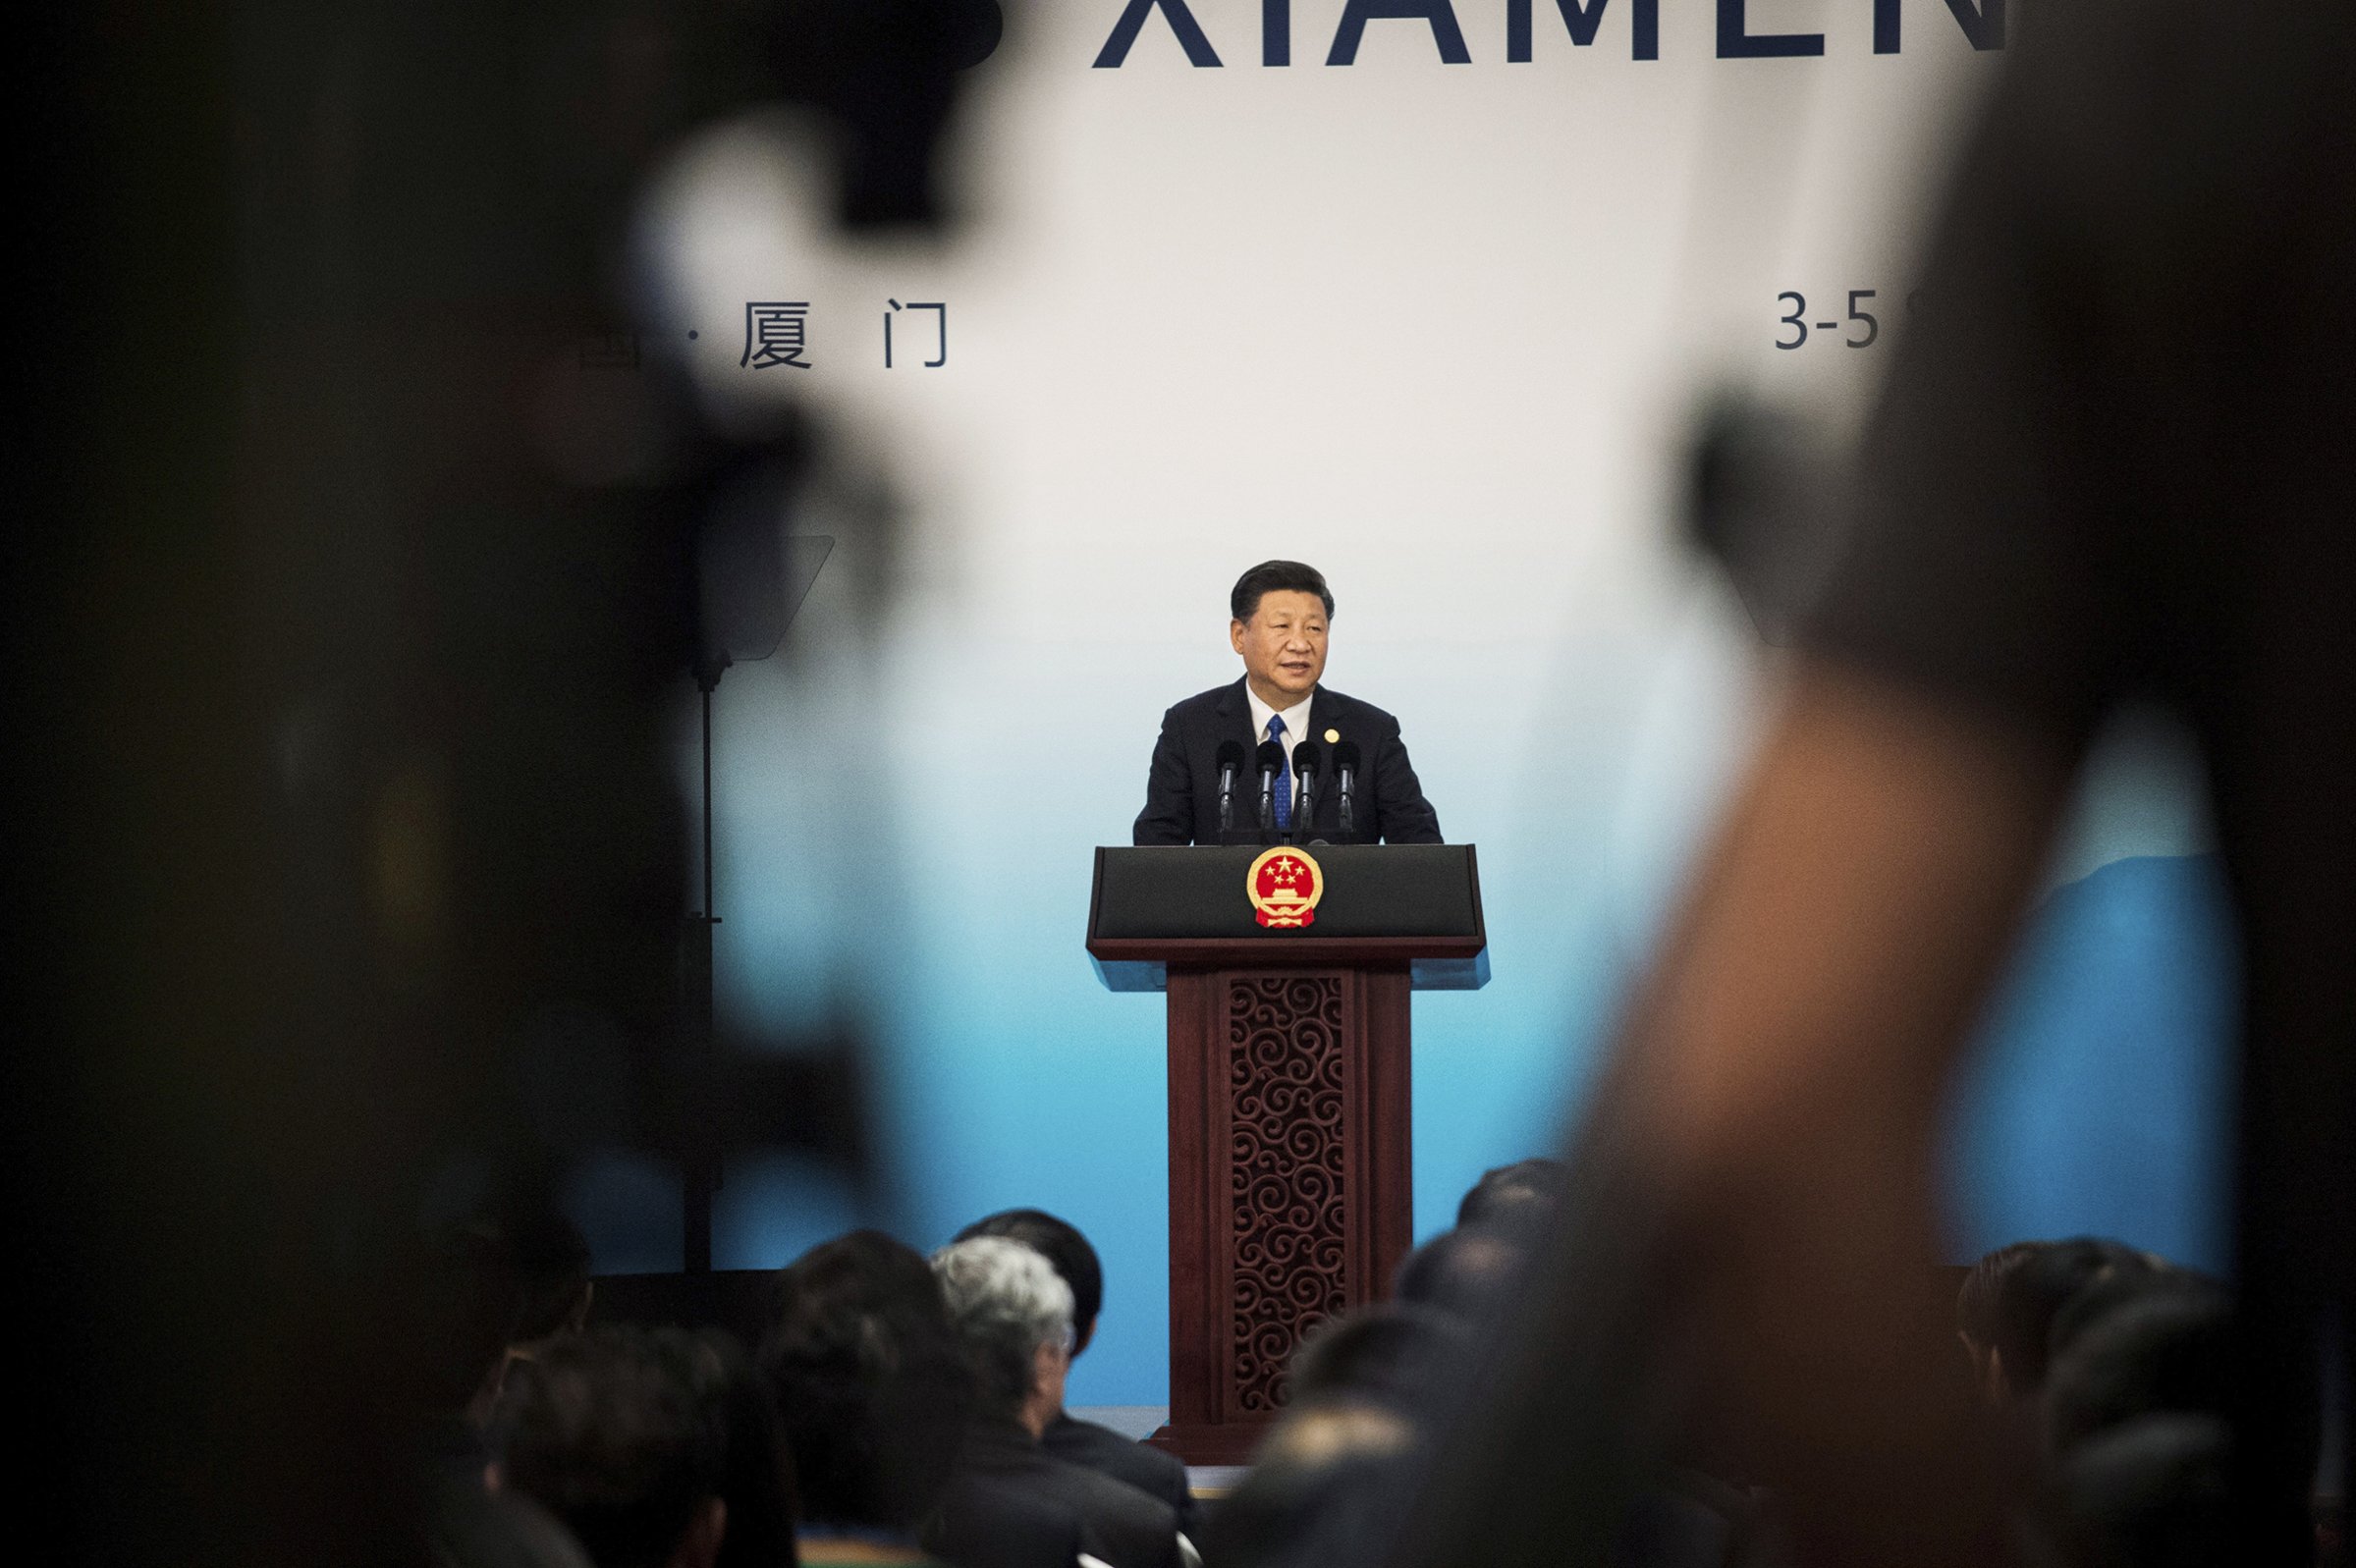 President Xi’s consolidation of power is a recipe for paralysis